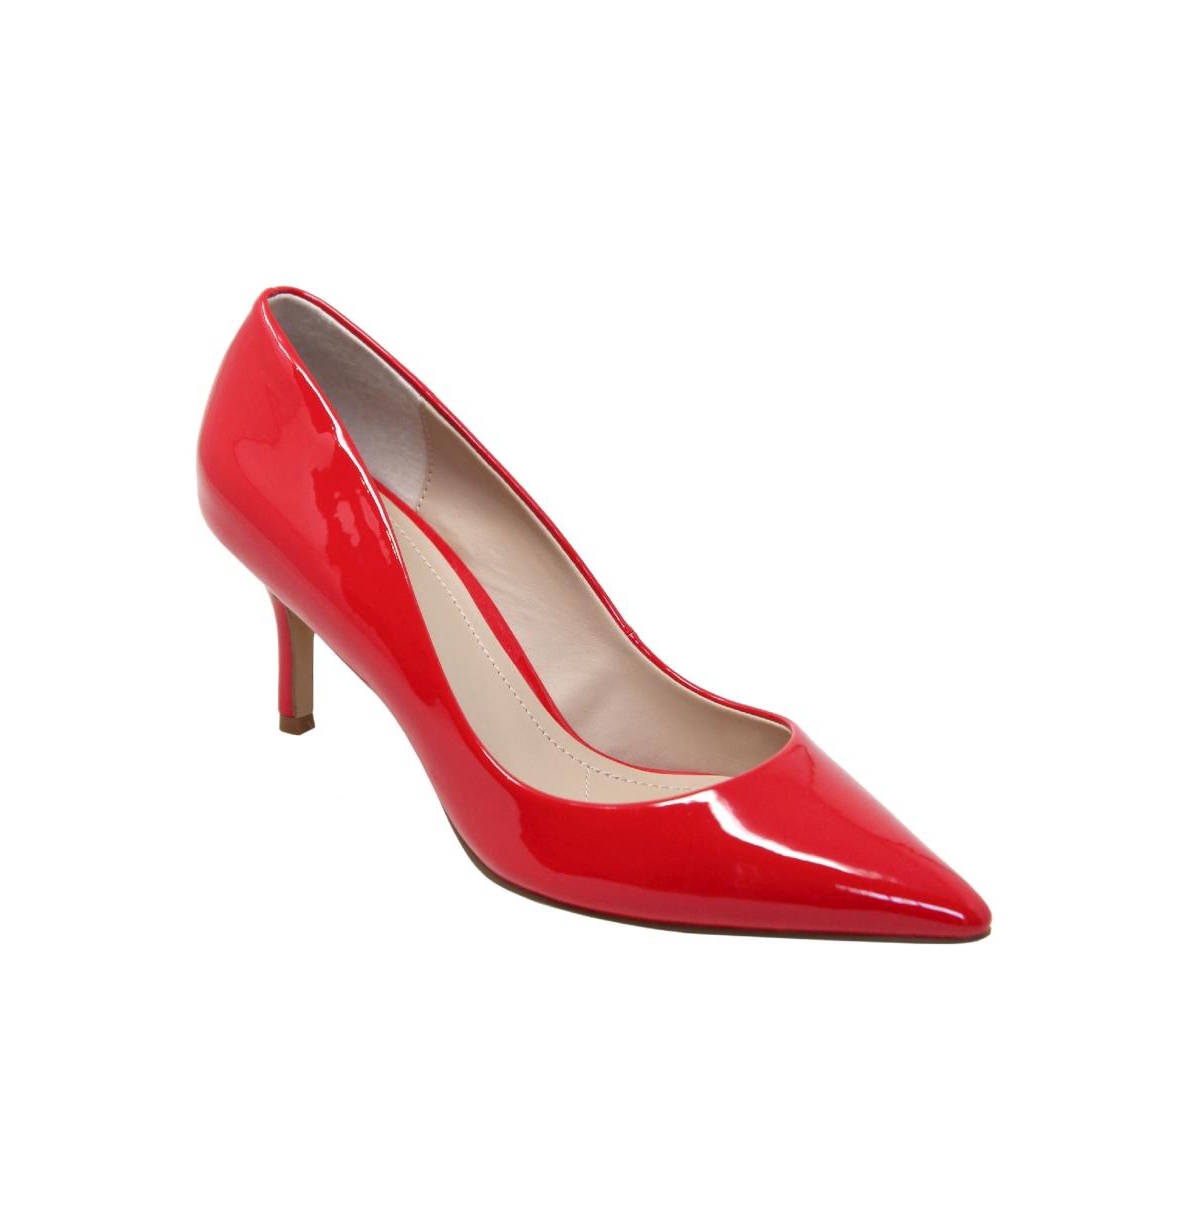 CHARLES BY CHARLES DAVID WOMENS ANGELICA PUMPS